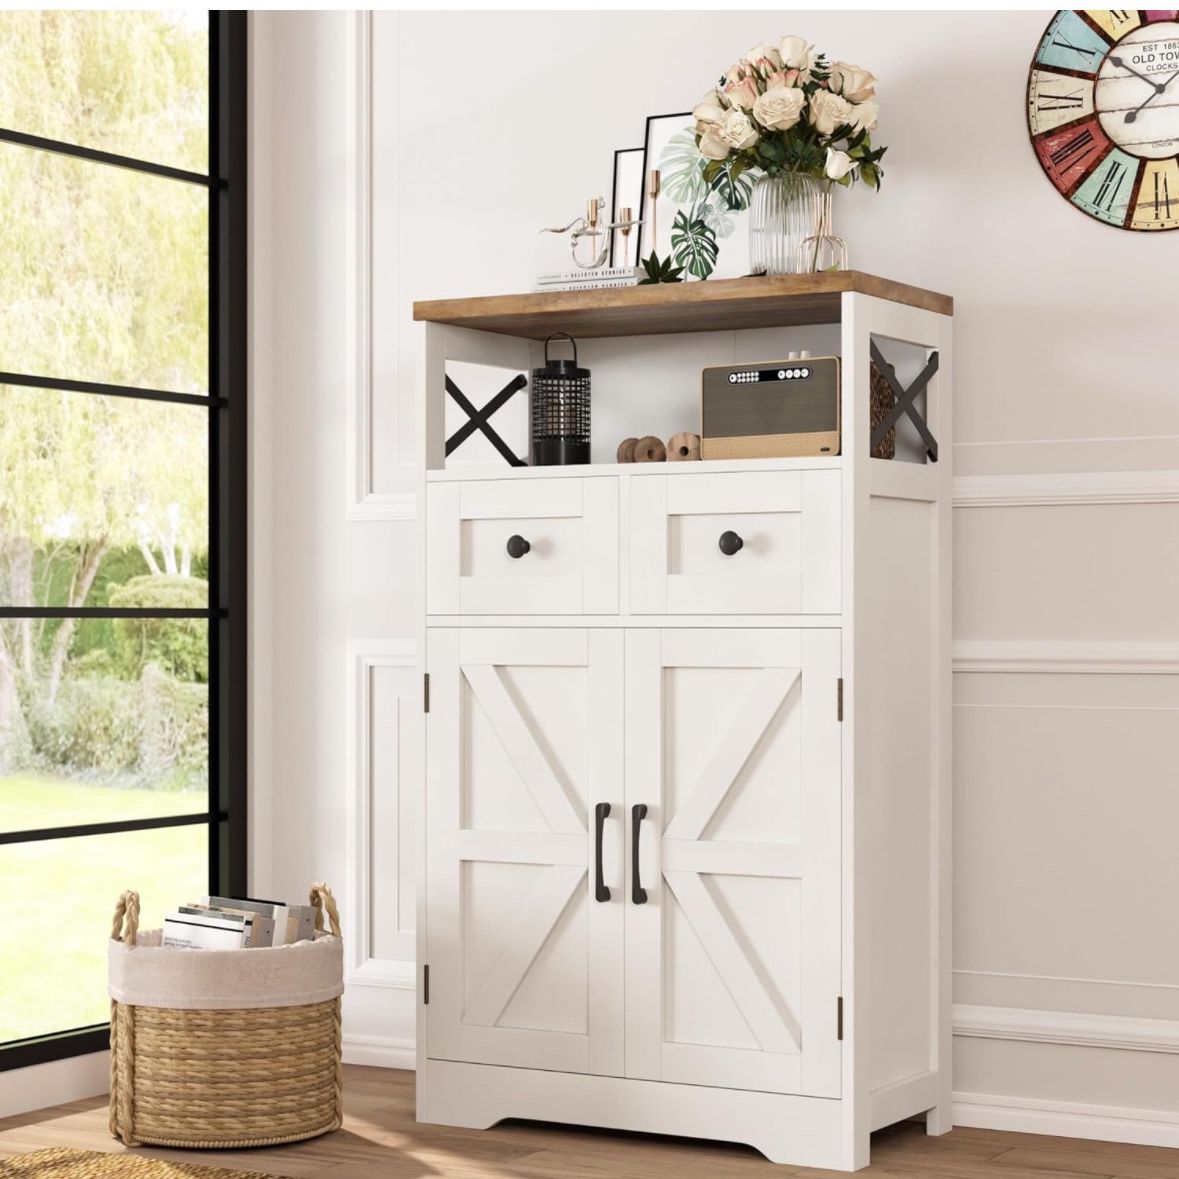 Befrases Farmhouse White Storage Cabinet with Doors and Drawers, Freestanding Kitchen Pantry Cabinet, Floor Storage Cabinet Hutch Cupboard for Kitchen